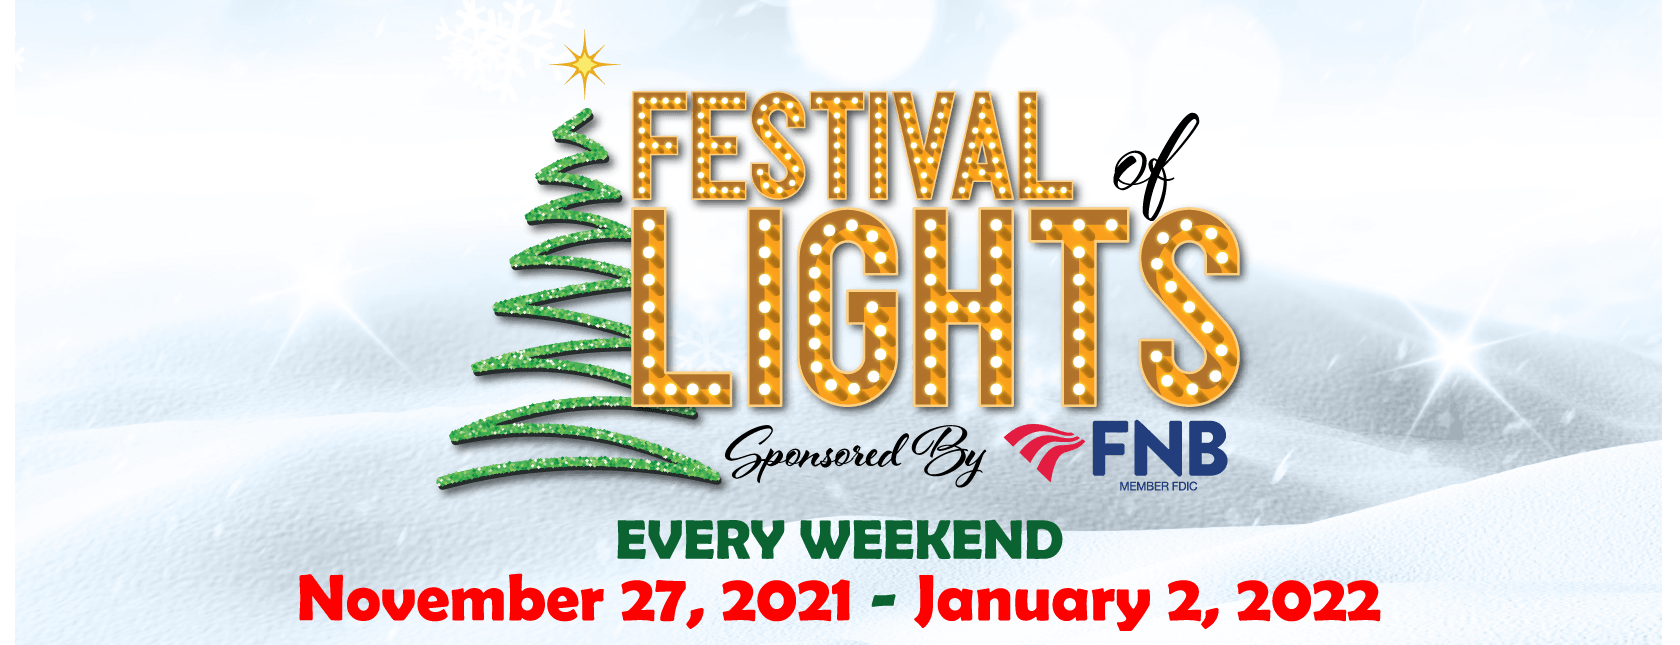 FNB Sponsors 3rd Annual Festival of Lights in Mayfield